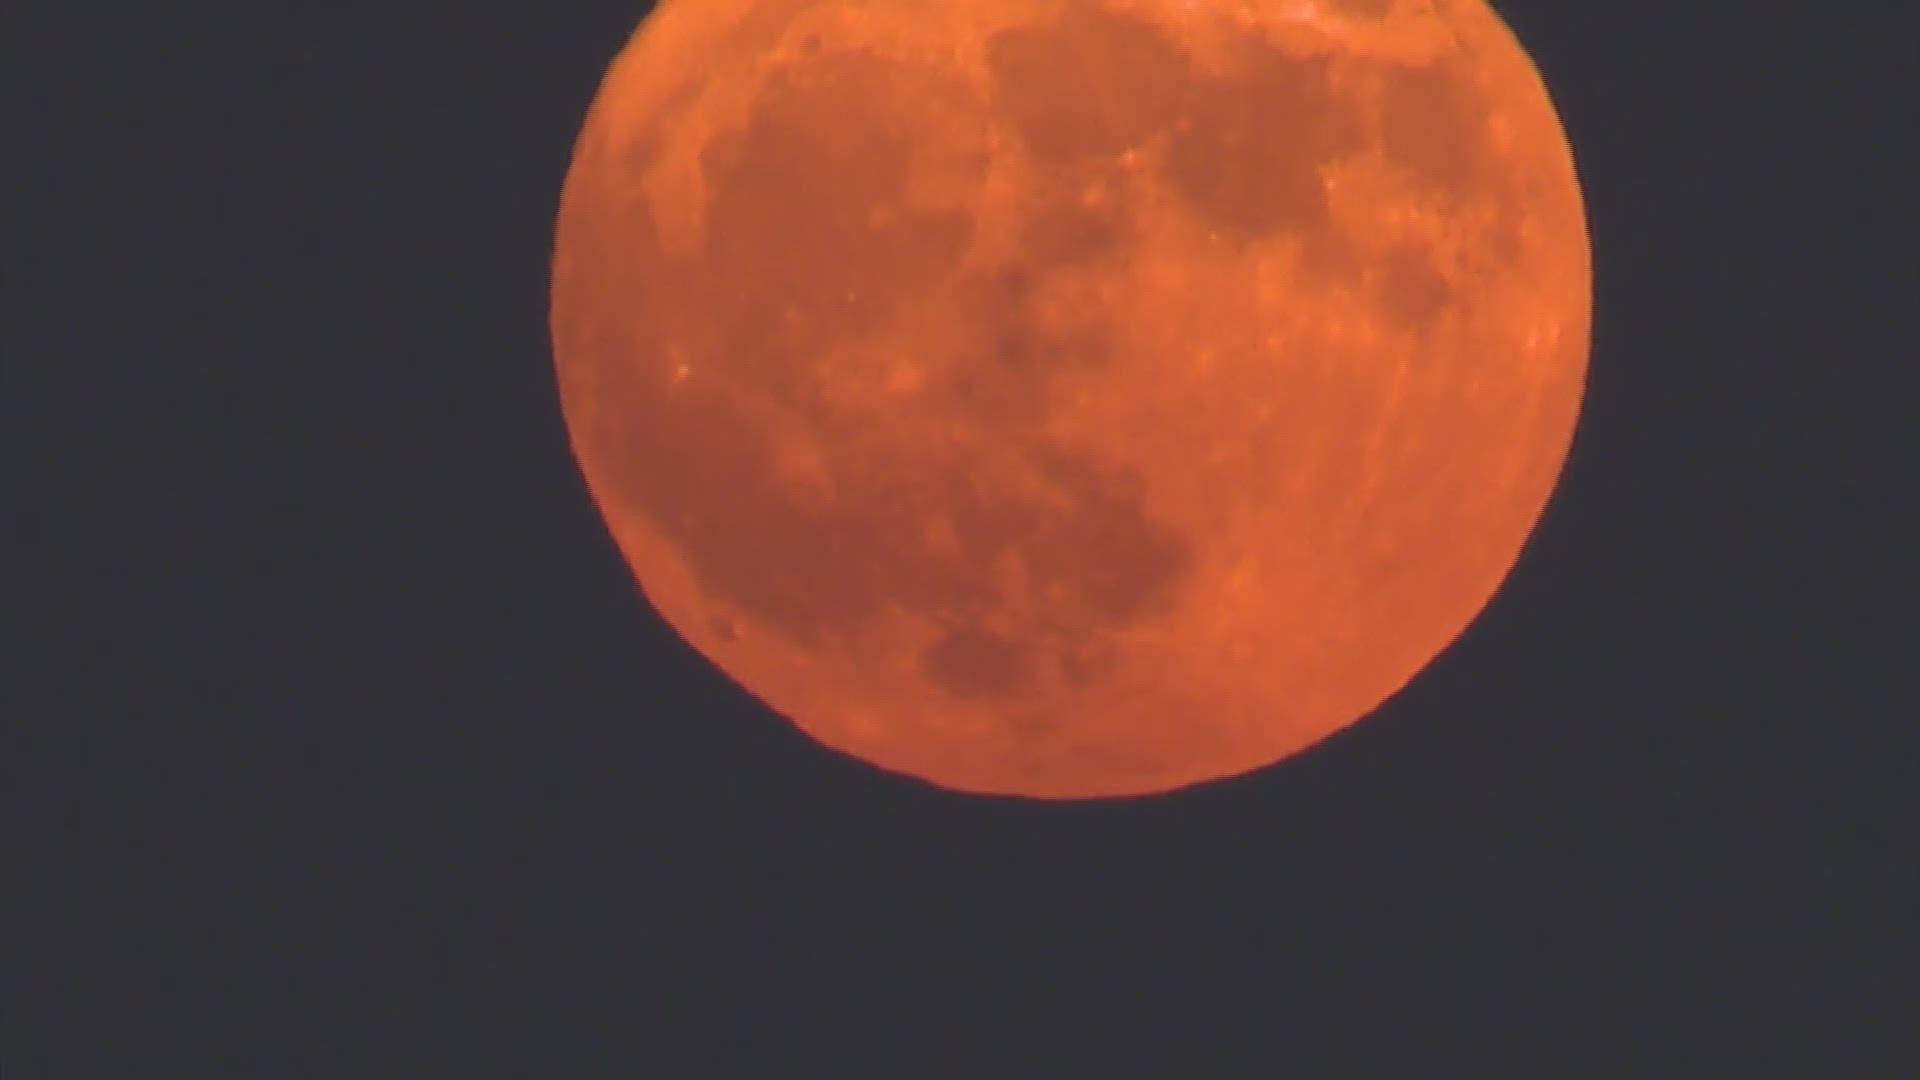 A beautiful harvest moon could be seen over Houston on Friday, Sept. 13, 2019. (Video: KHOU 11 Photojournalist Ryan Phillips)